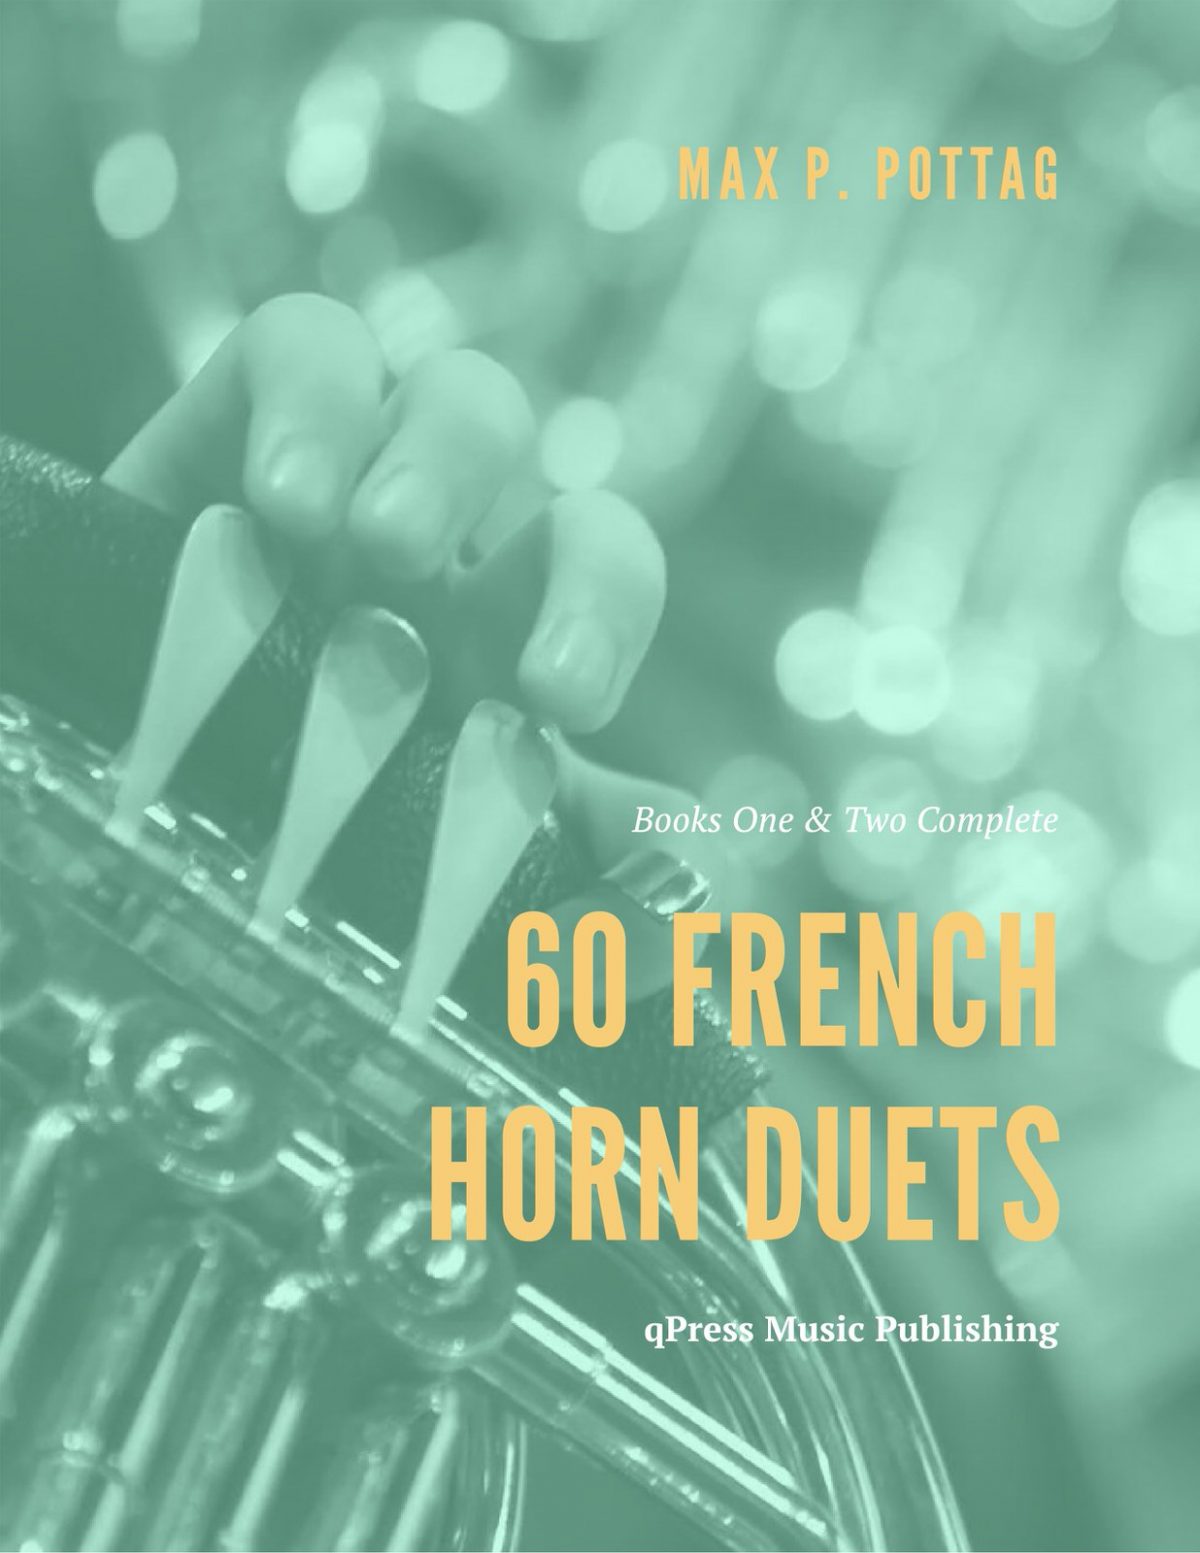 60 French Horn Duets Book 1 & 2